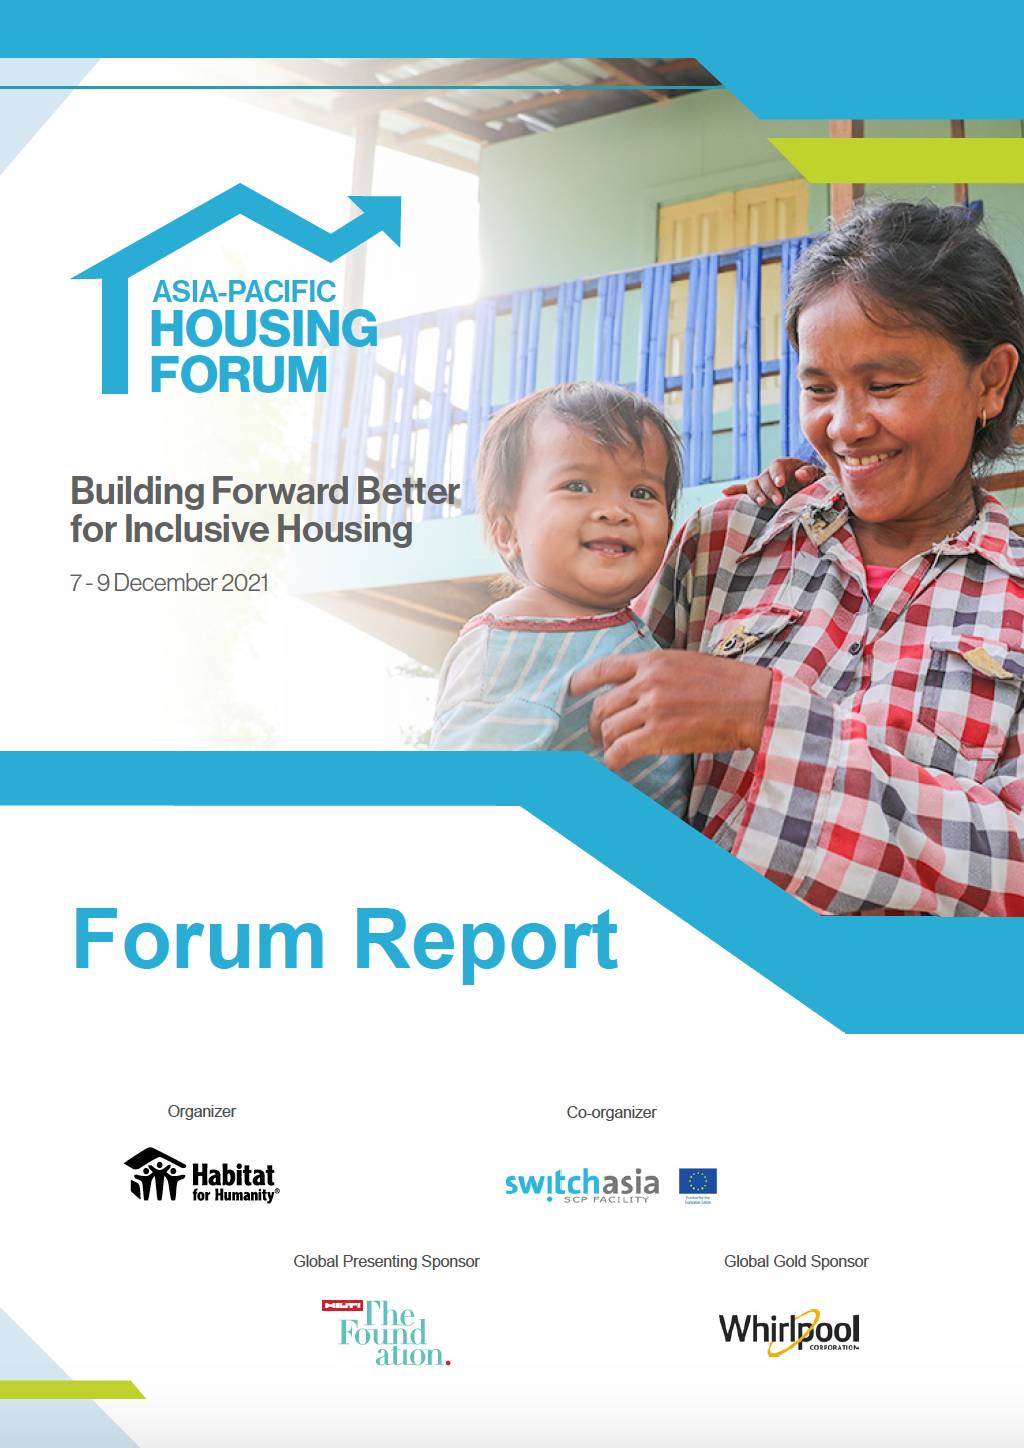 Asia Pacific Housing Forum: Building Forward Better for Inclusive Housing